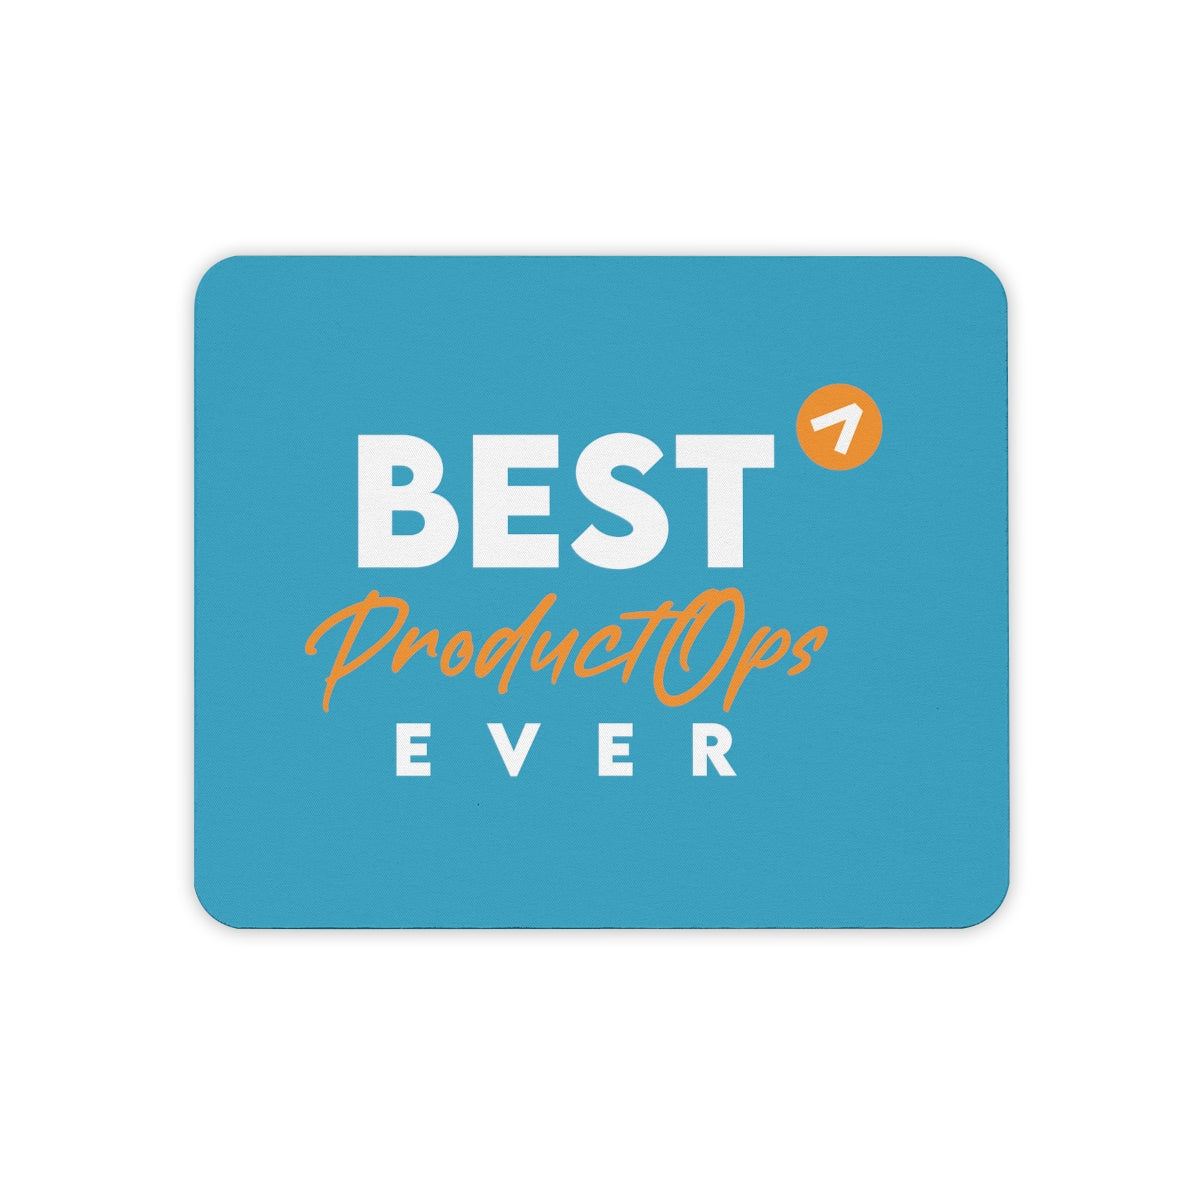 Best Product Operations ever - Orange Blue - Mouse Pad (3mm Thick)